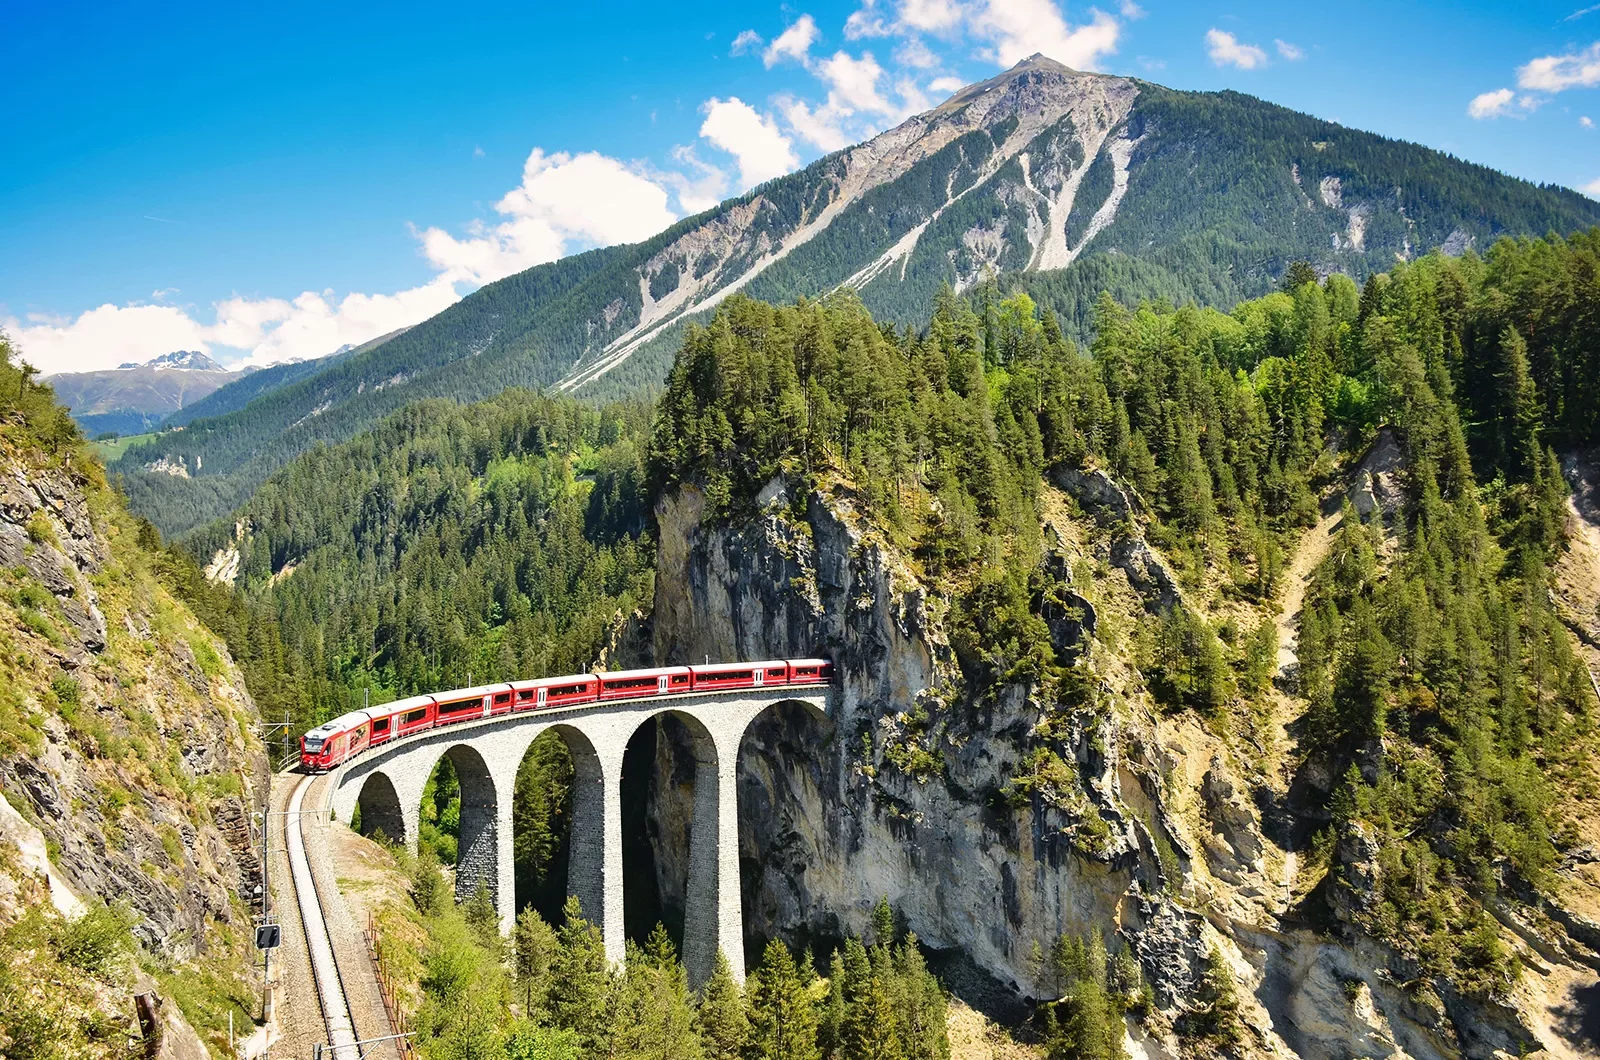 Landwasser viaduct in the Davos mountains near Filisur. Beautiful old stone bridge with a moving train.